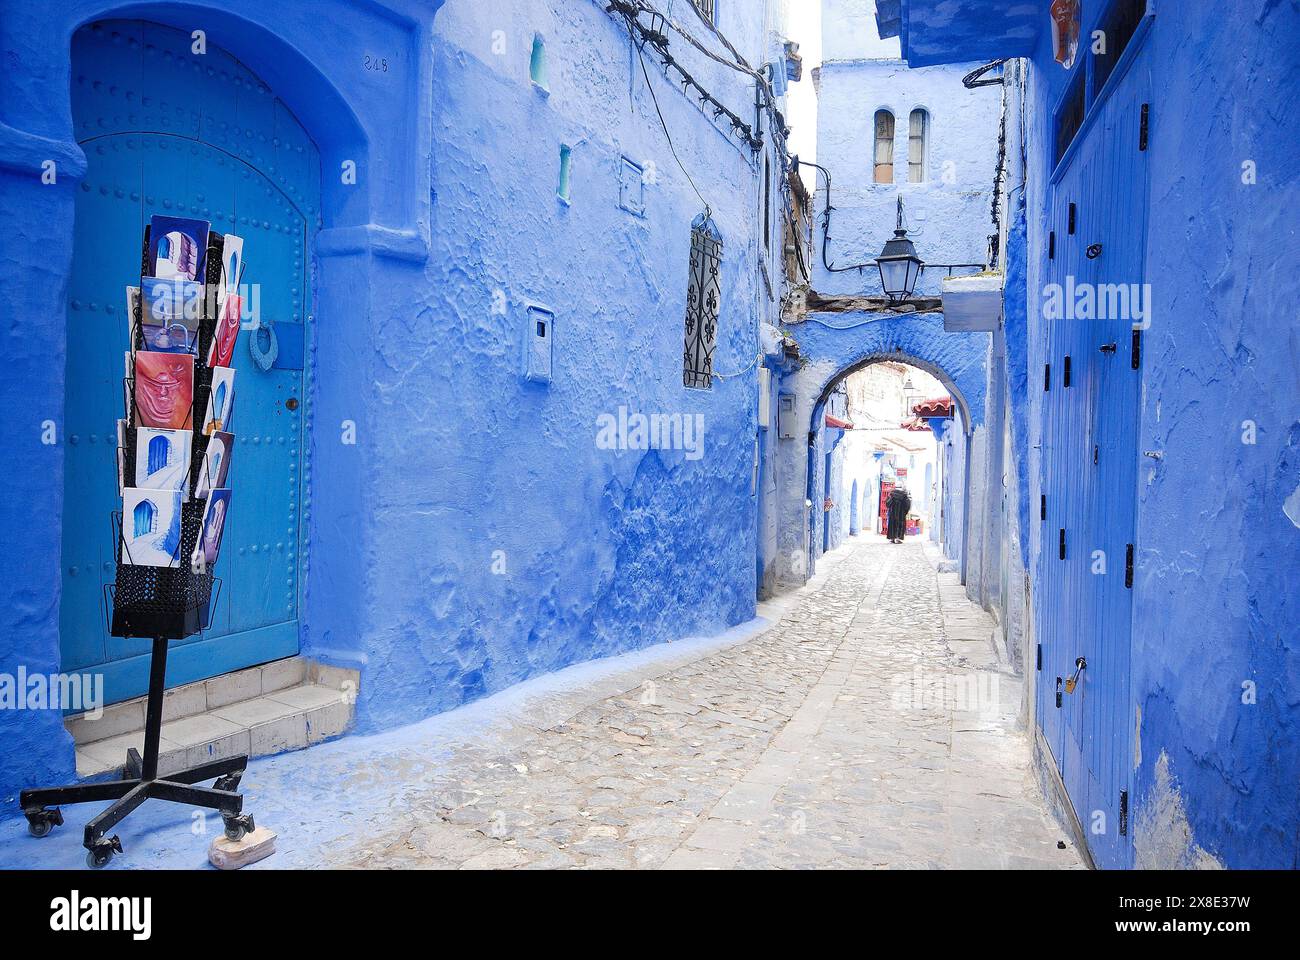 Blue town of Chefchaouen, Maroc Stock Photo